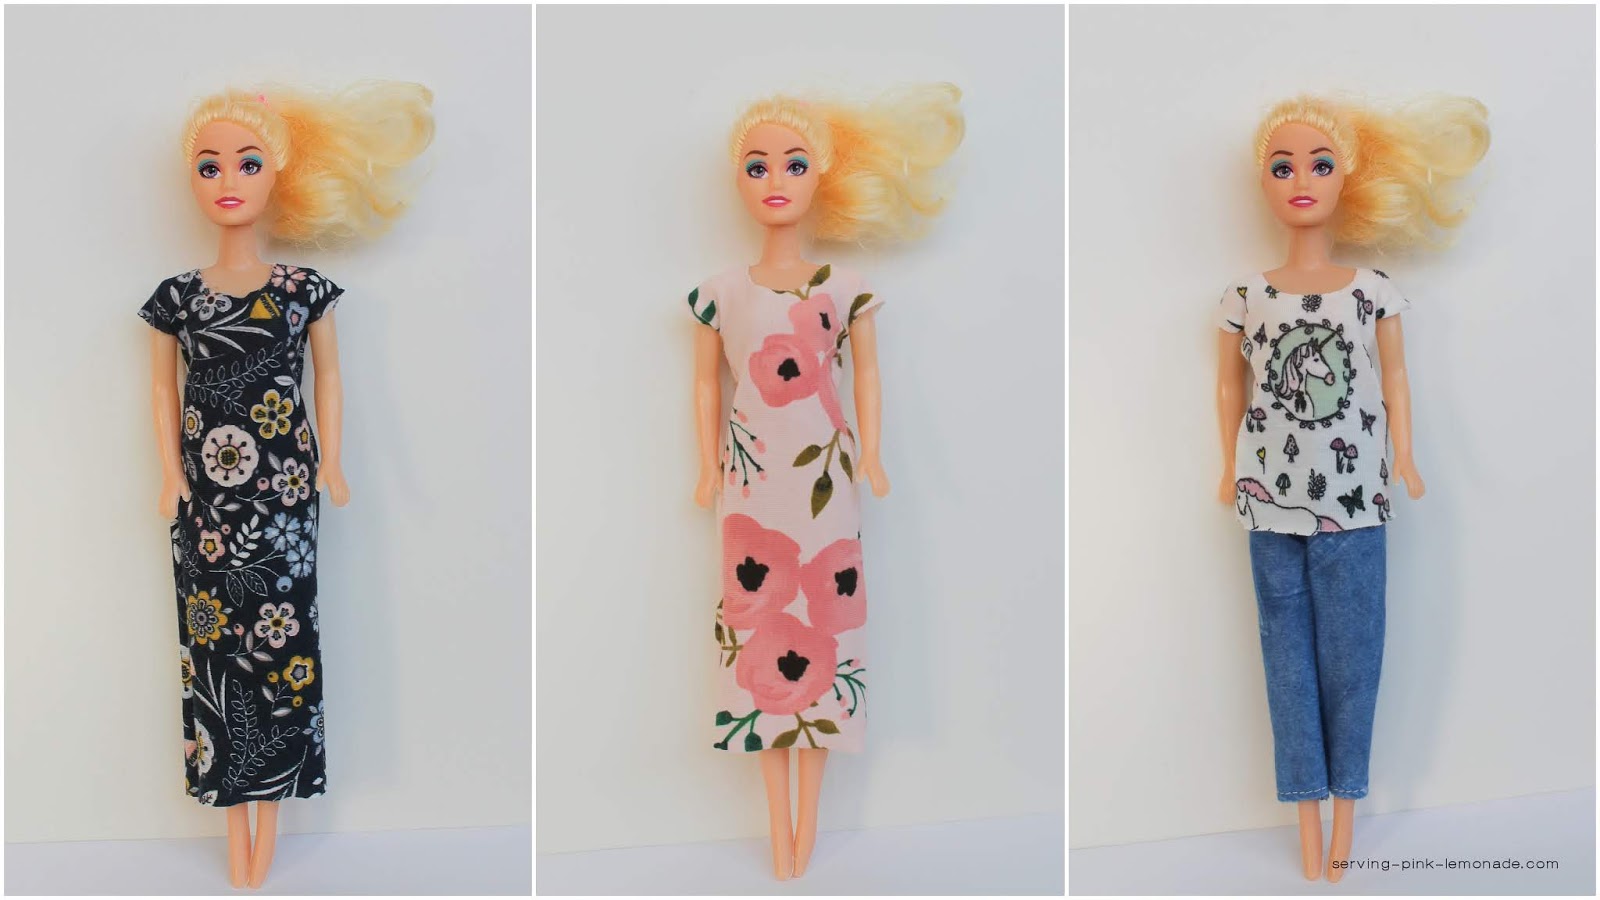 Serving Pink Lemonade: to Sew a Ridiculously Easy Barbie Dress in Under a